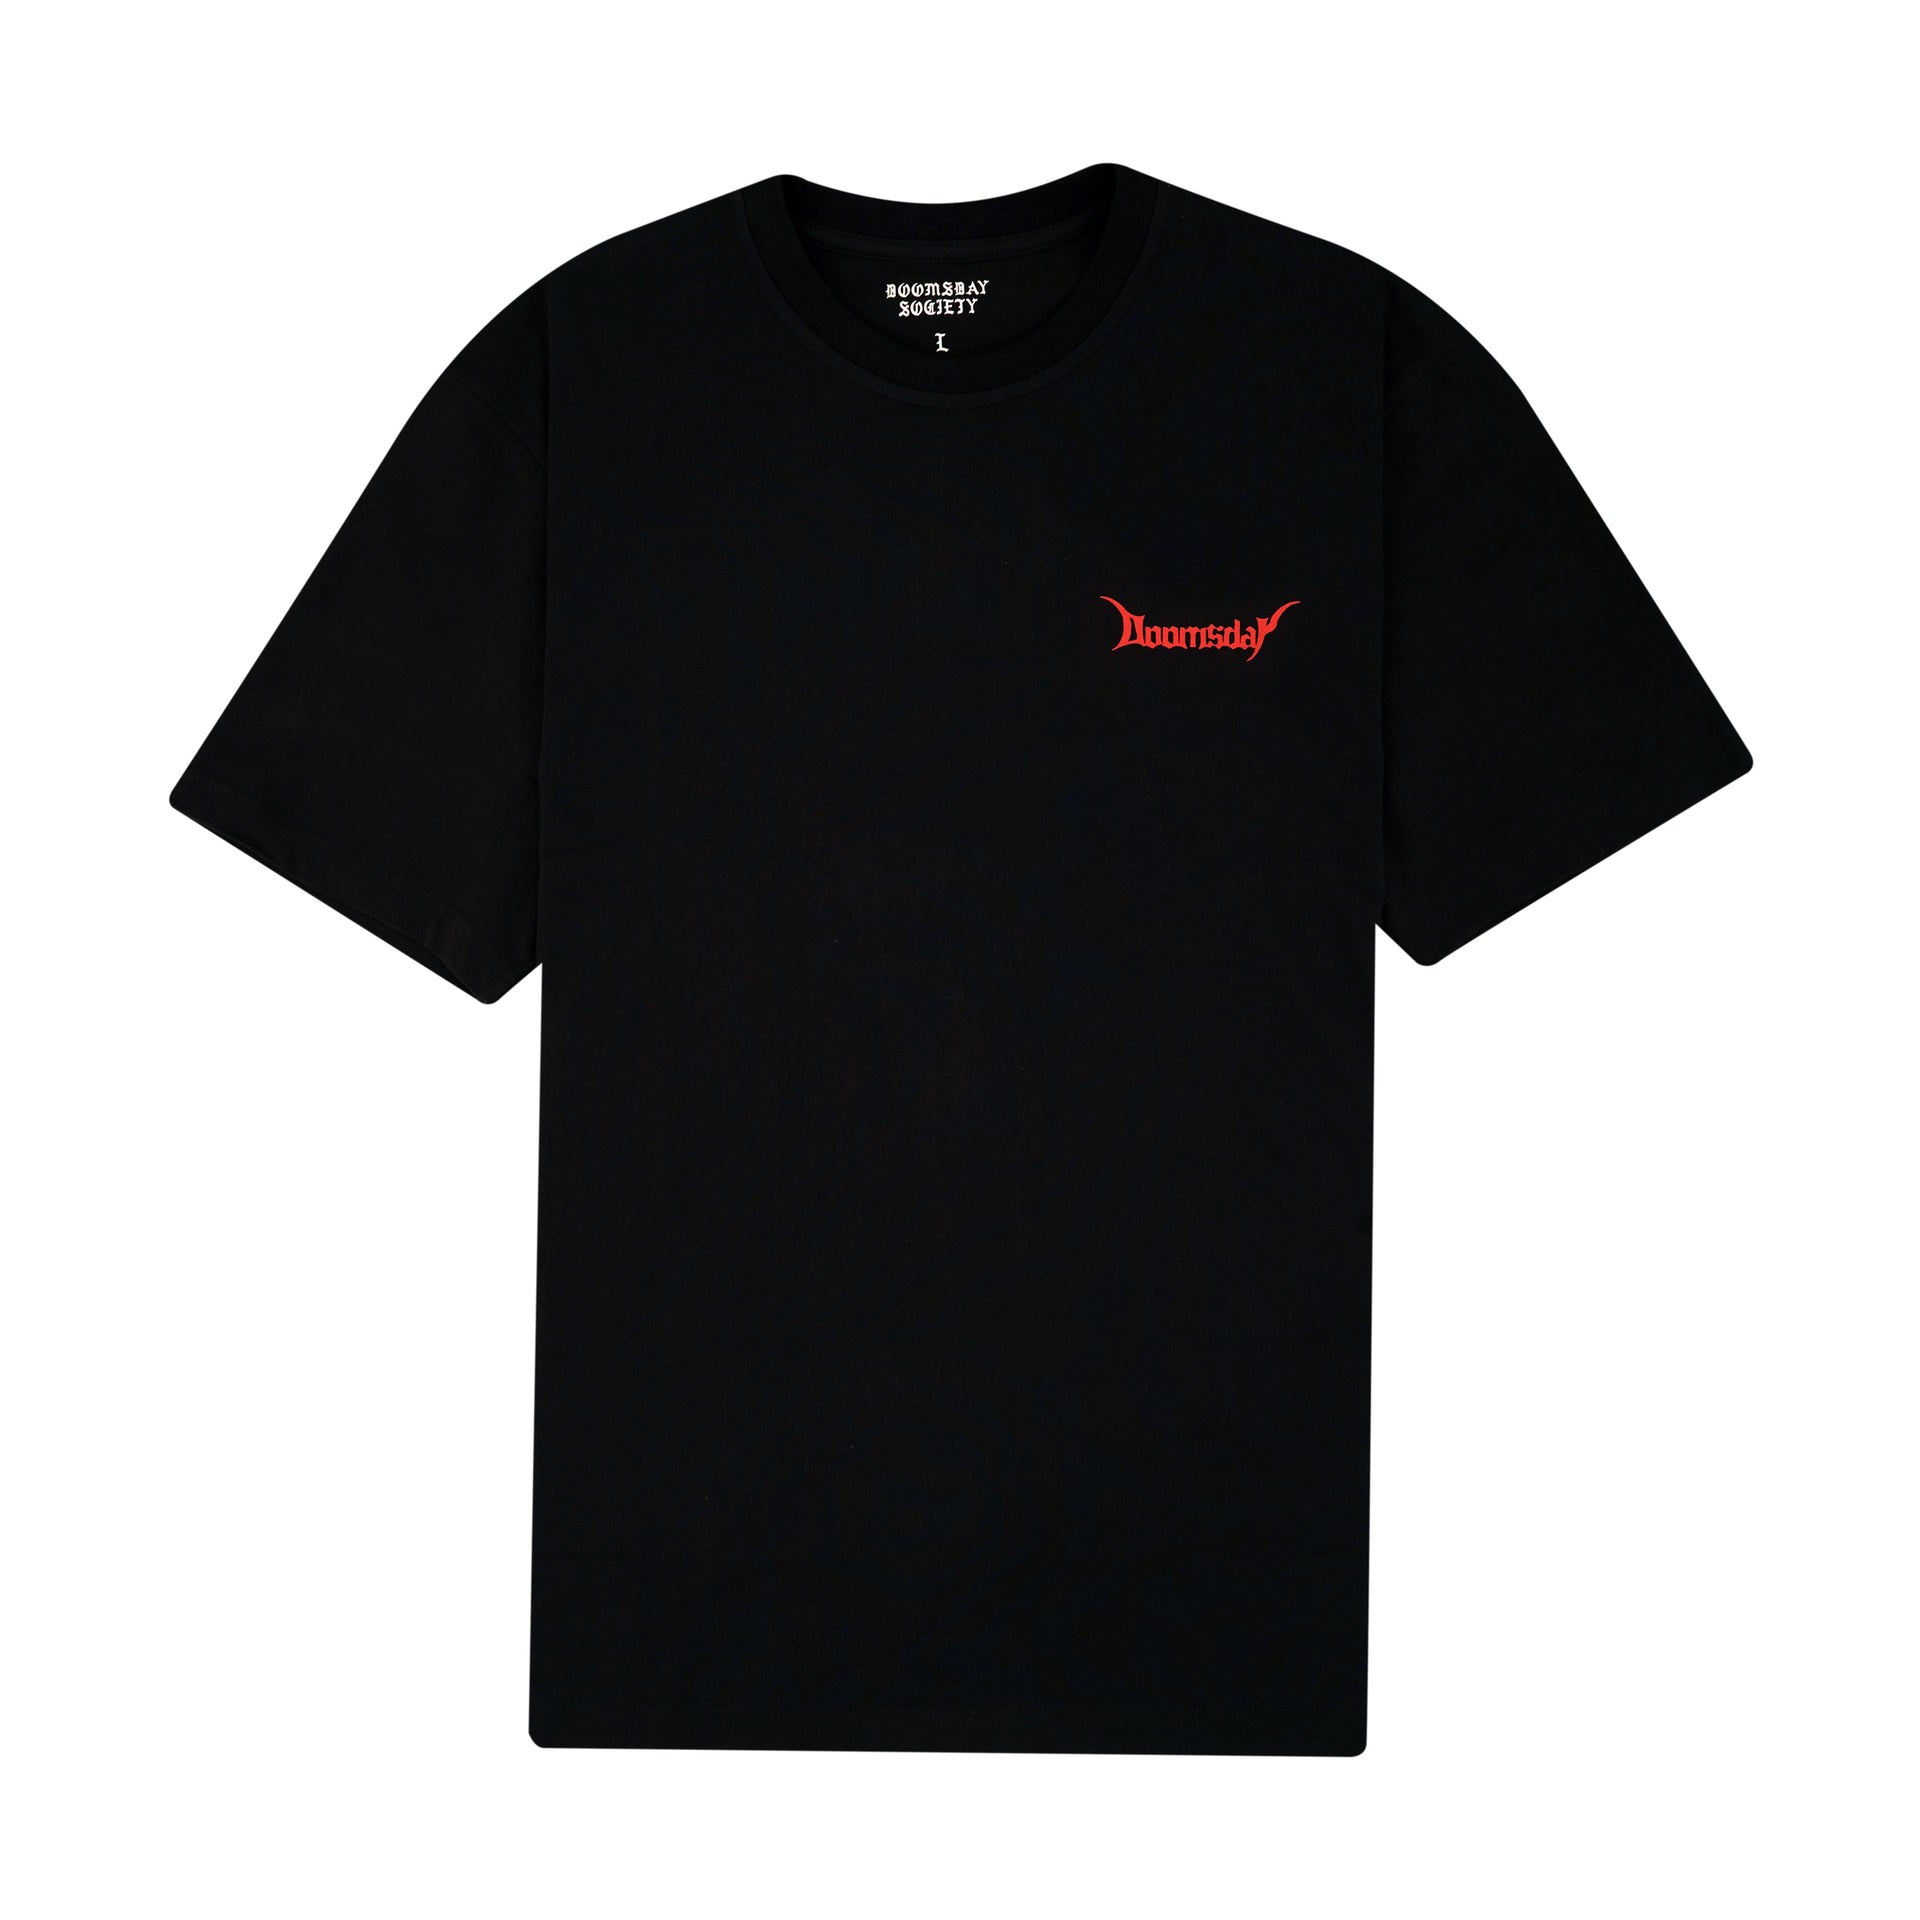 BODE Pocket Tee Embroidered T-shirt - Farfetch